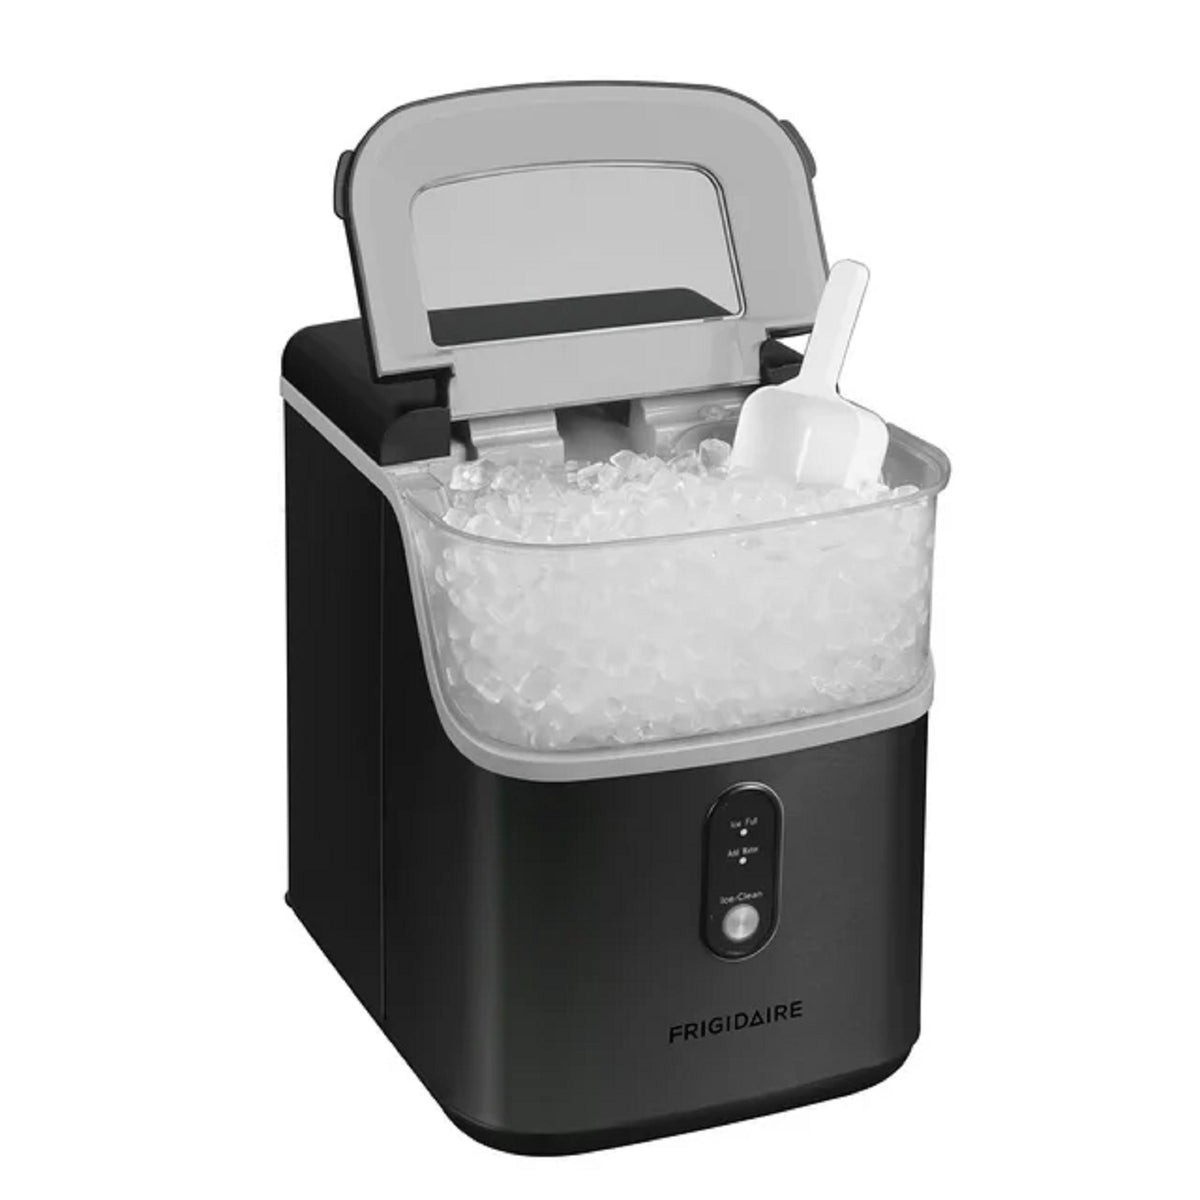 33 lbs Stainless Steel Crunchy Chewable Nugget Ice Maker by